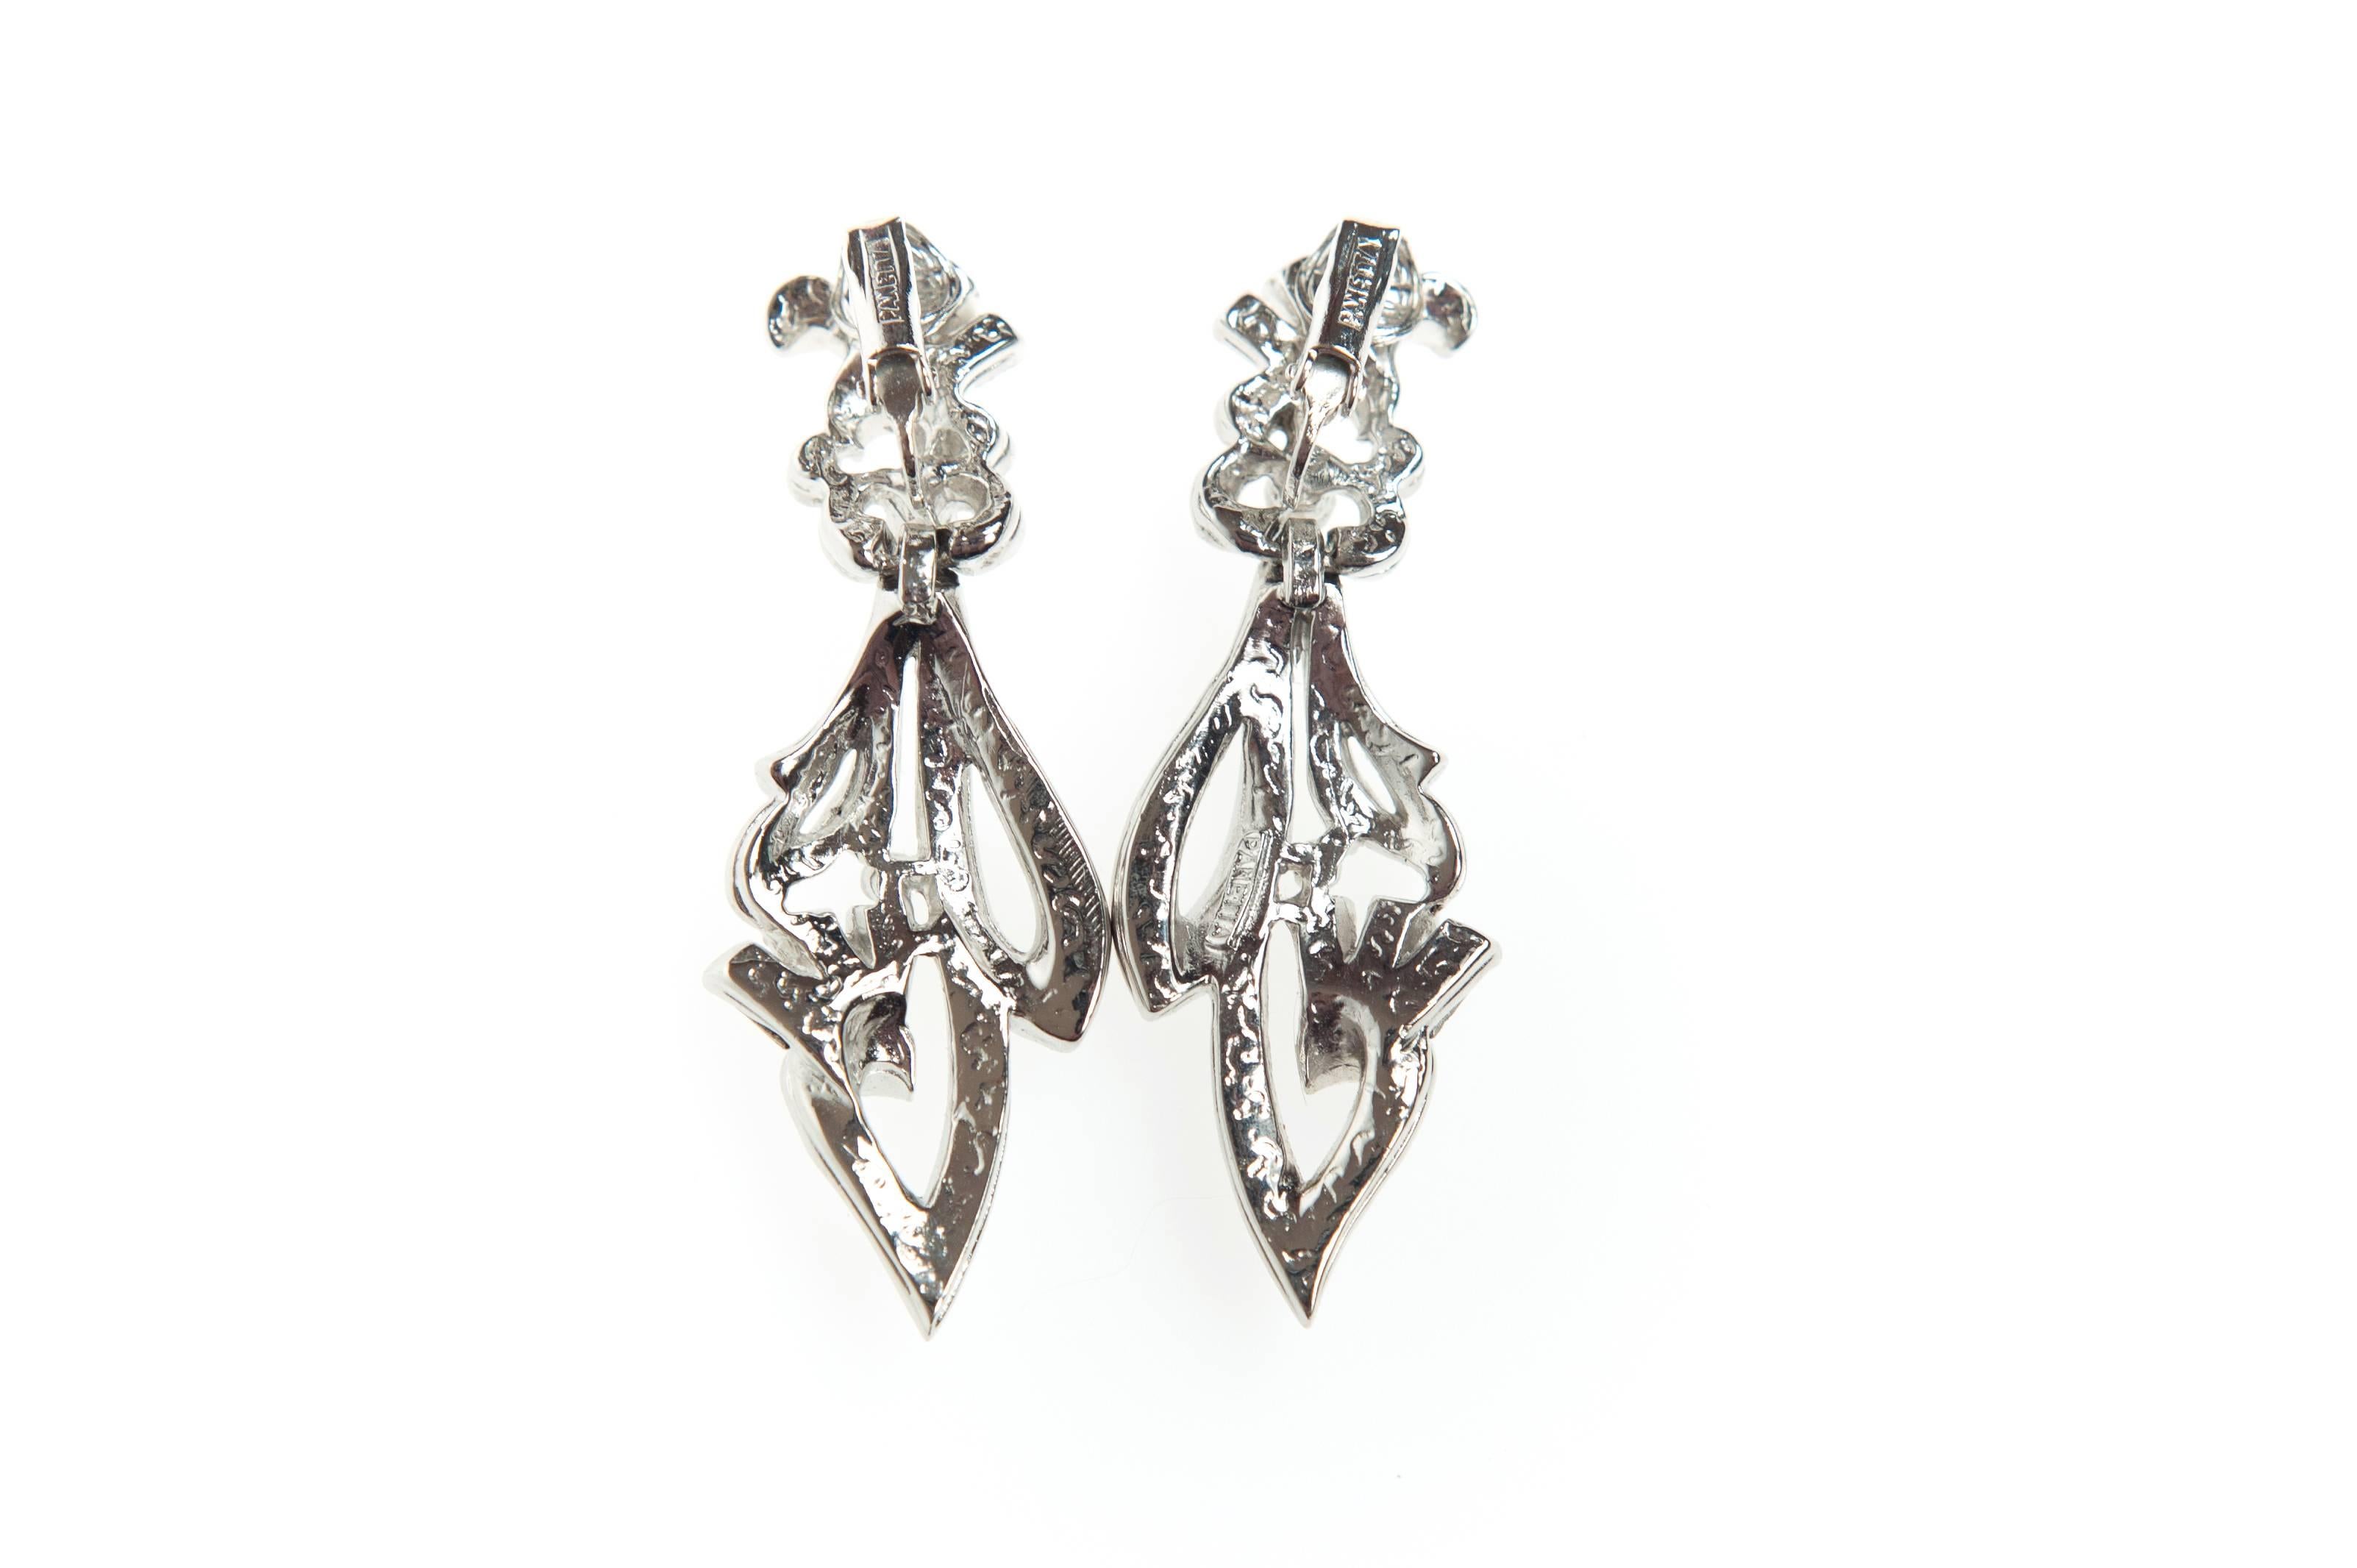 Beautiful Vintage Rhodium plated rhinestone clip on pendant earrings by Panetta.
They are pave set with crystal clear rhinestones and have textured backs, reminiscent of fine jewellery.
Marked: Panetta

About the Designer:
Panetta 1945 -